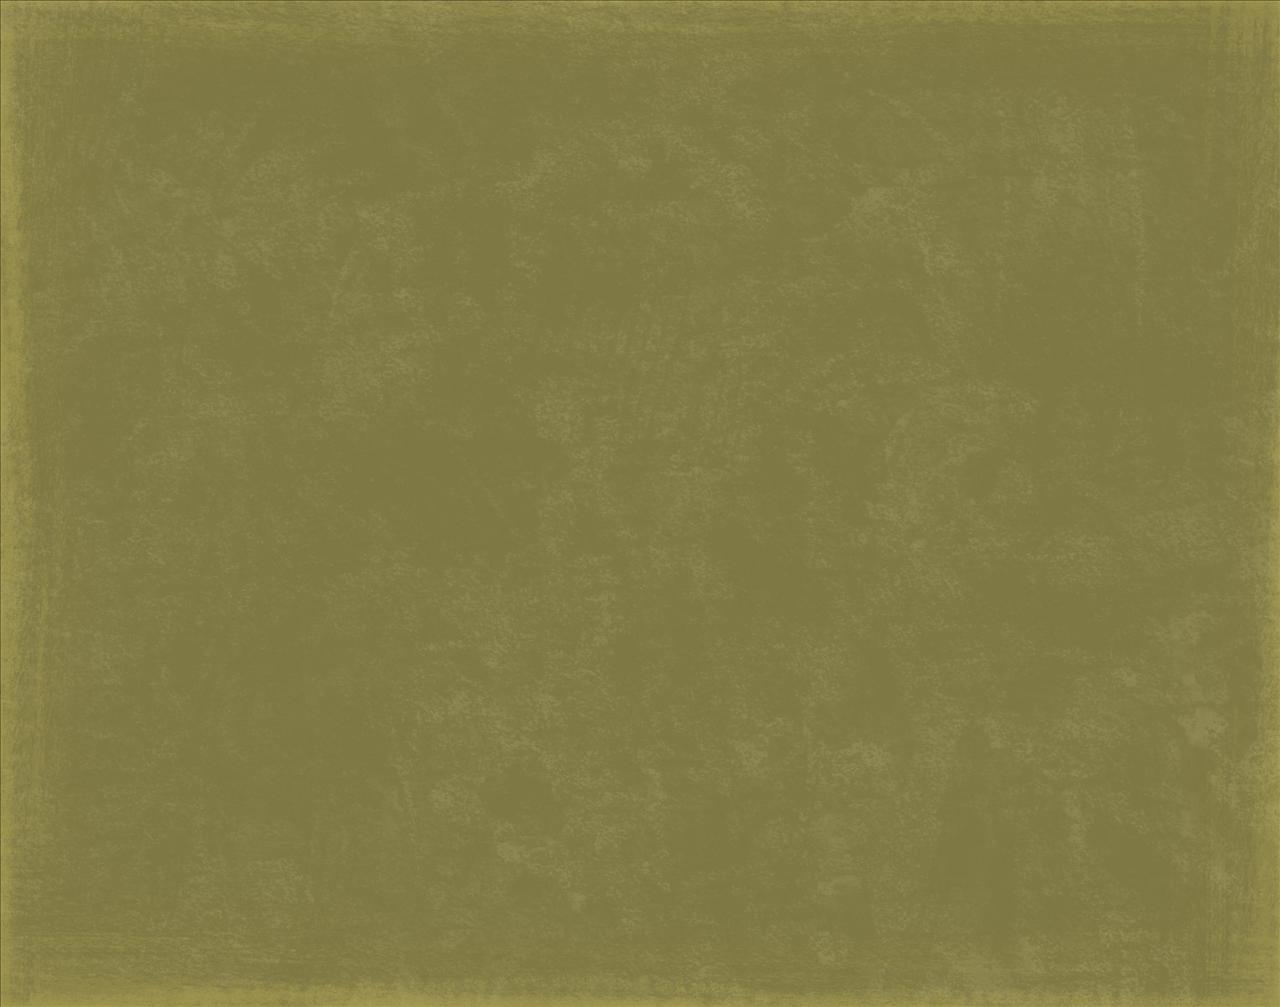 Olive Green Backgrounds